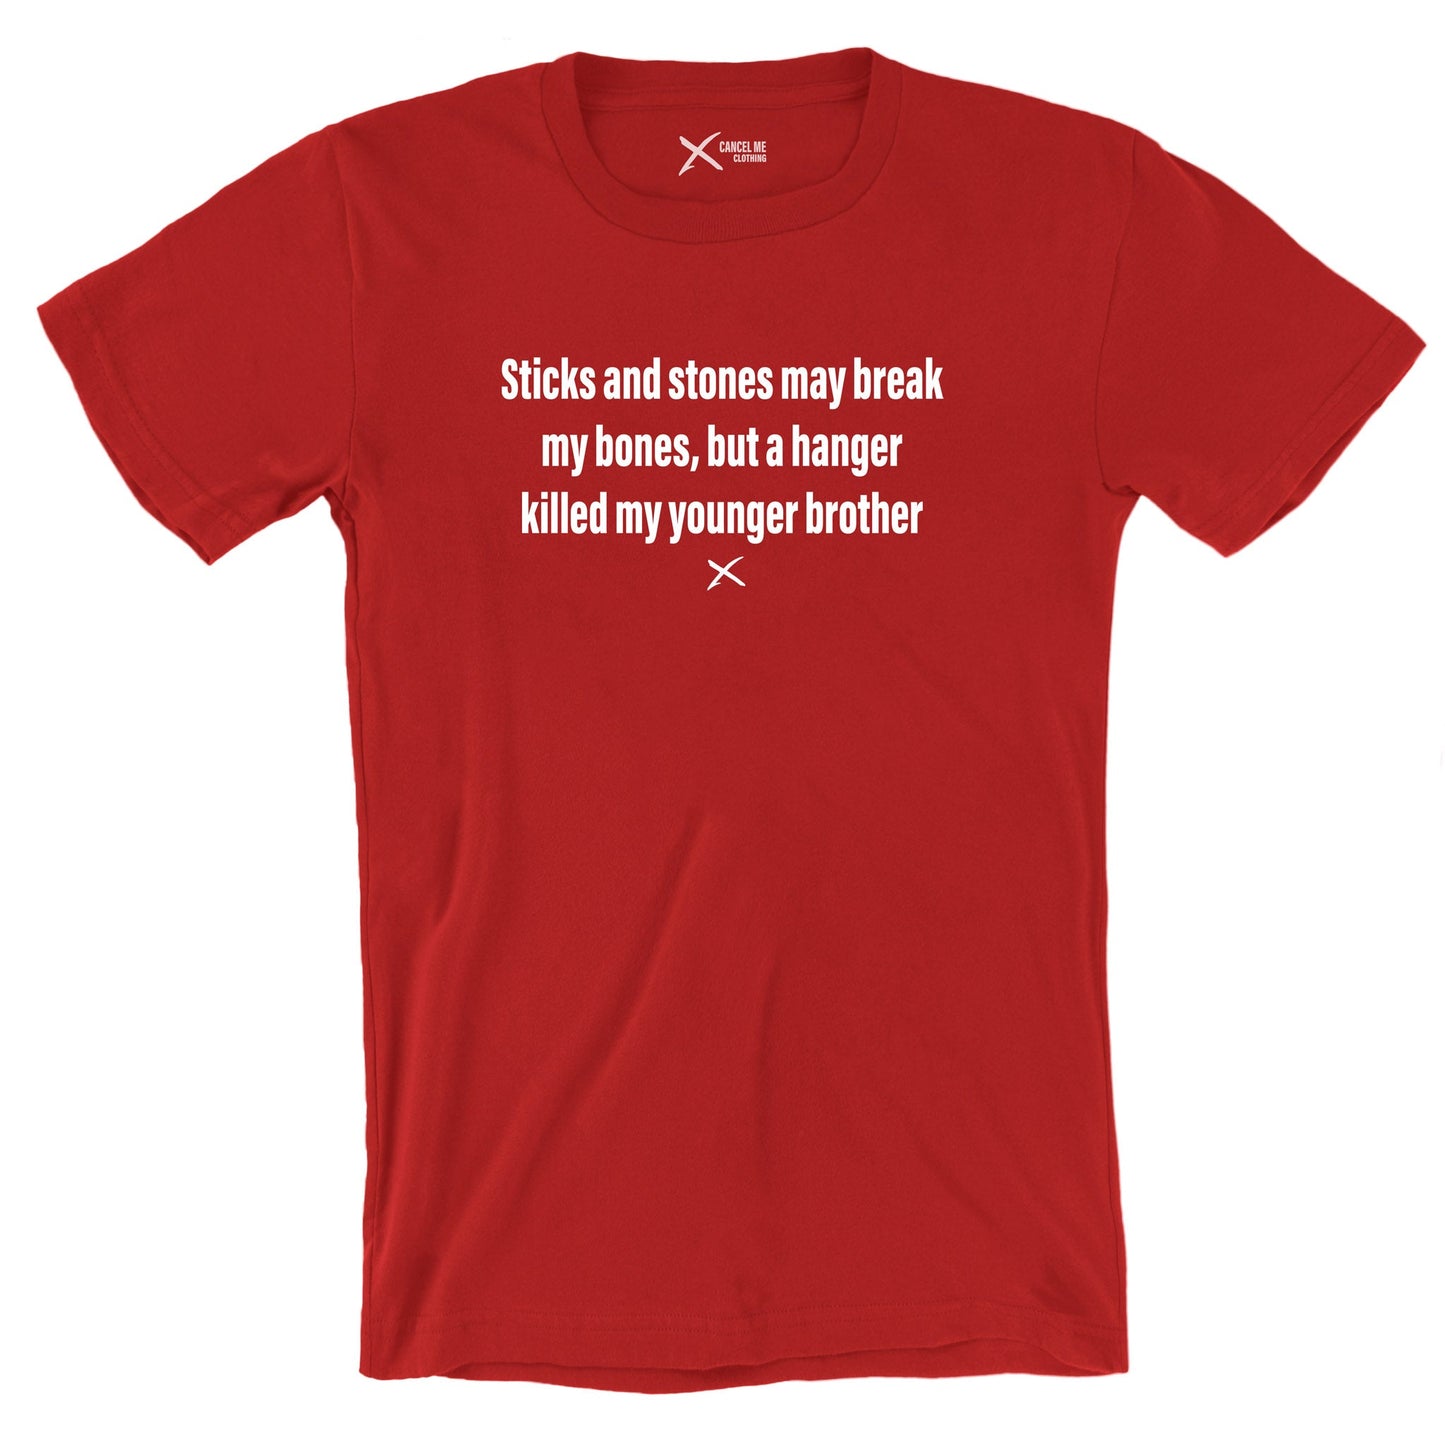 Sticks and stones may break my bones, but a hanger killed my younger brother - Shirt